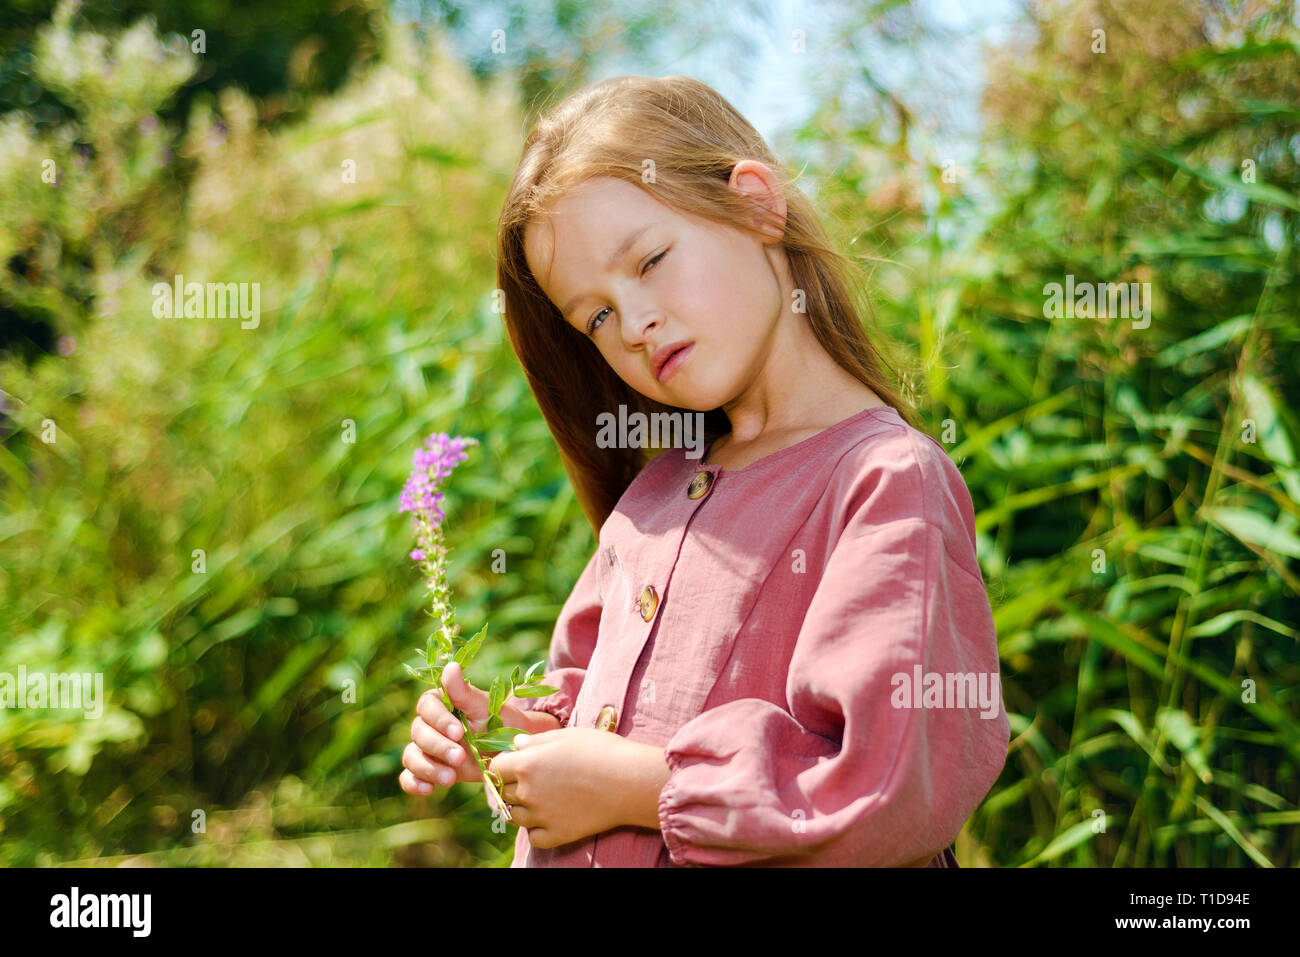 beautiful little girl in burgundy dress holding flower in sunny day. in the background green grass Stock Photo